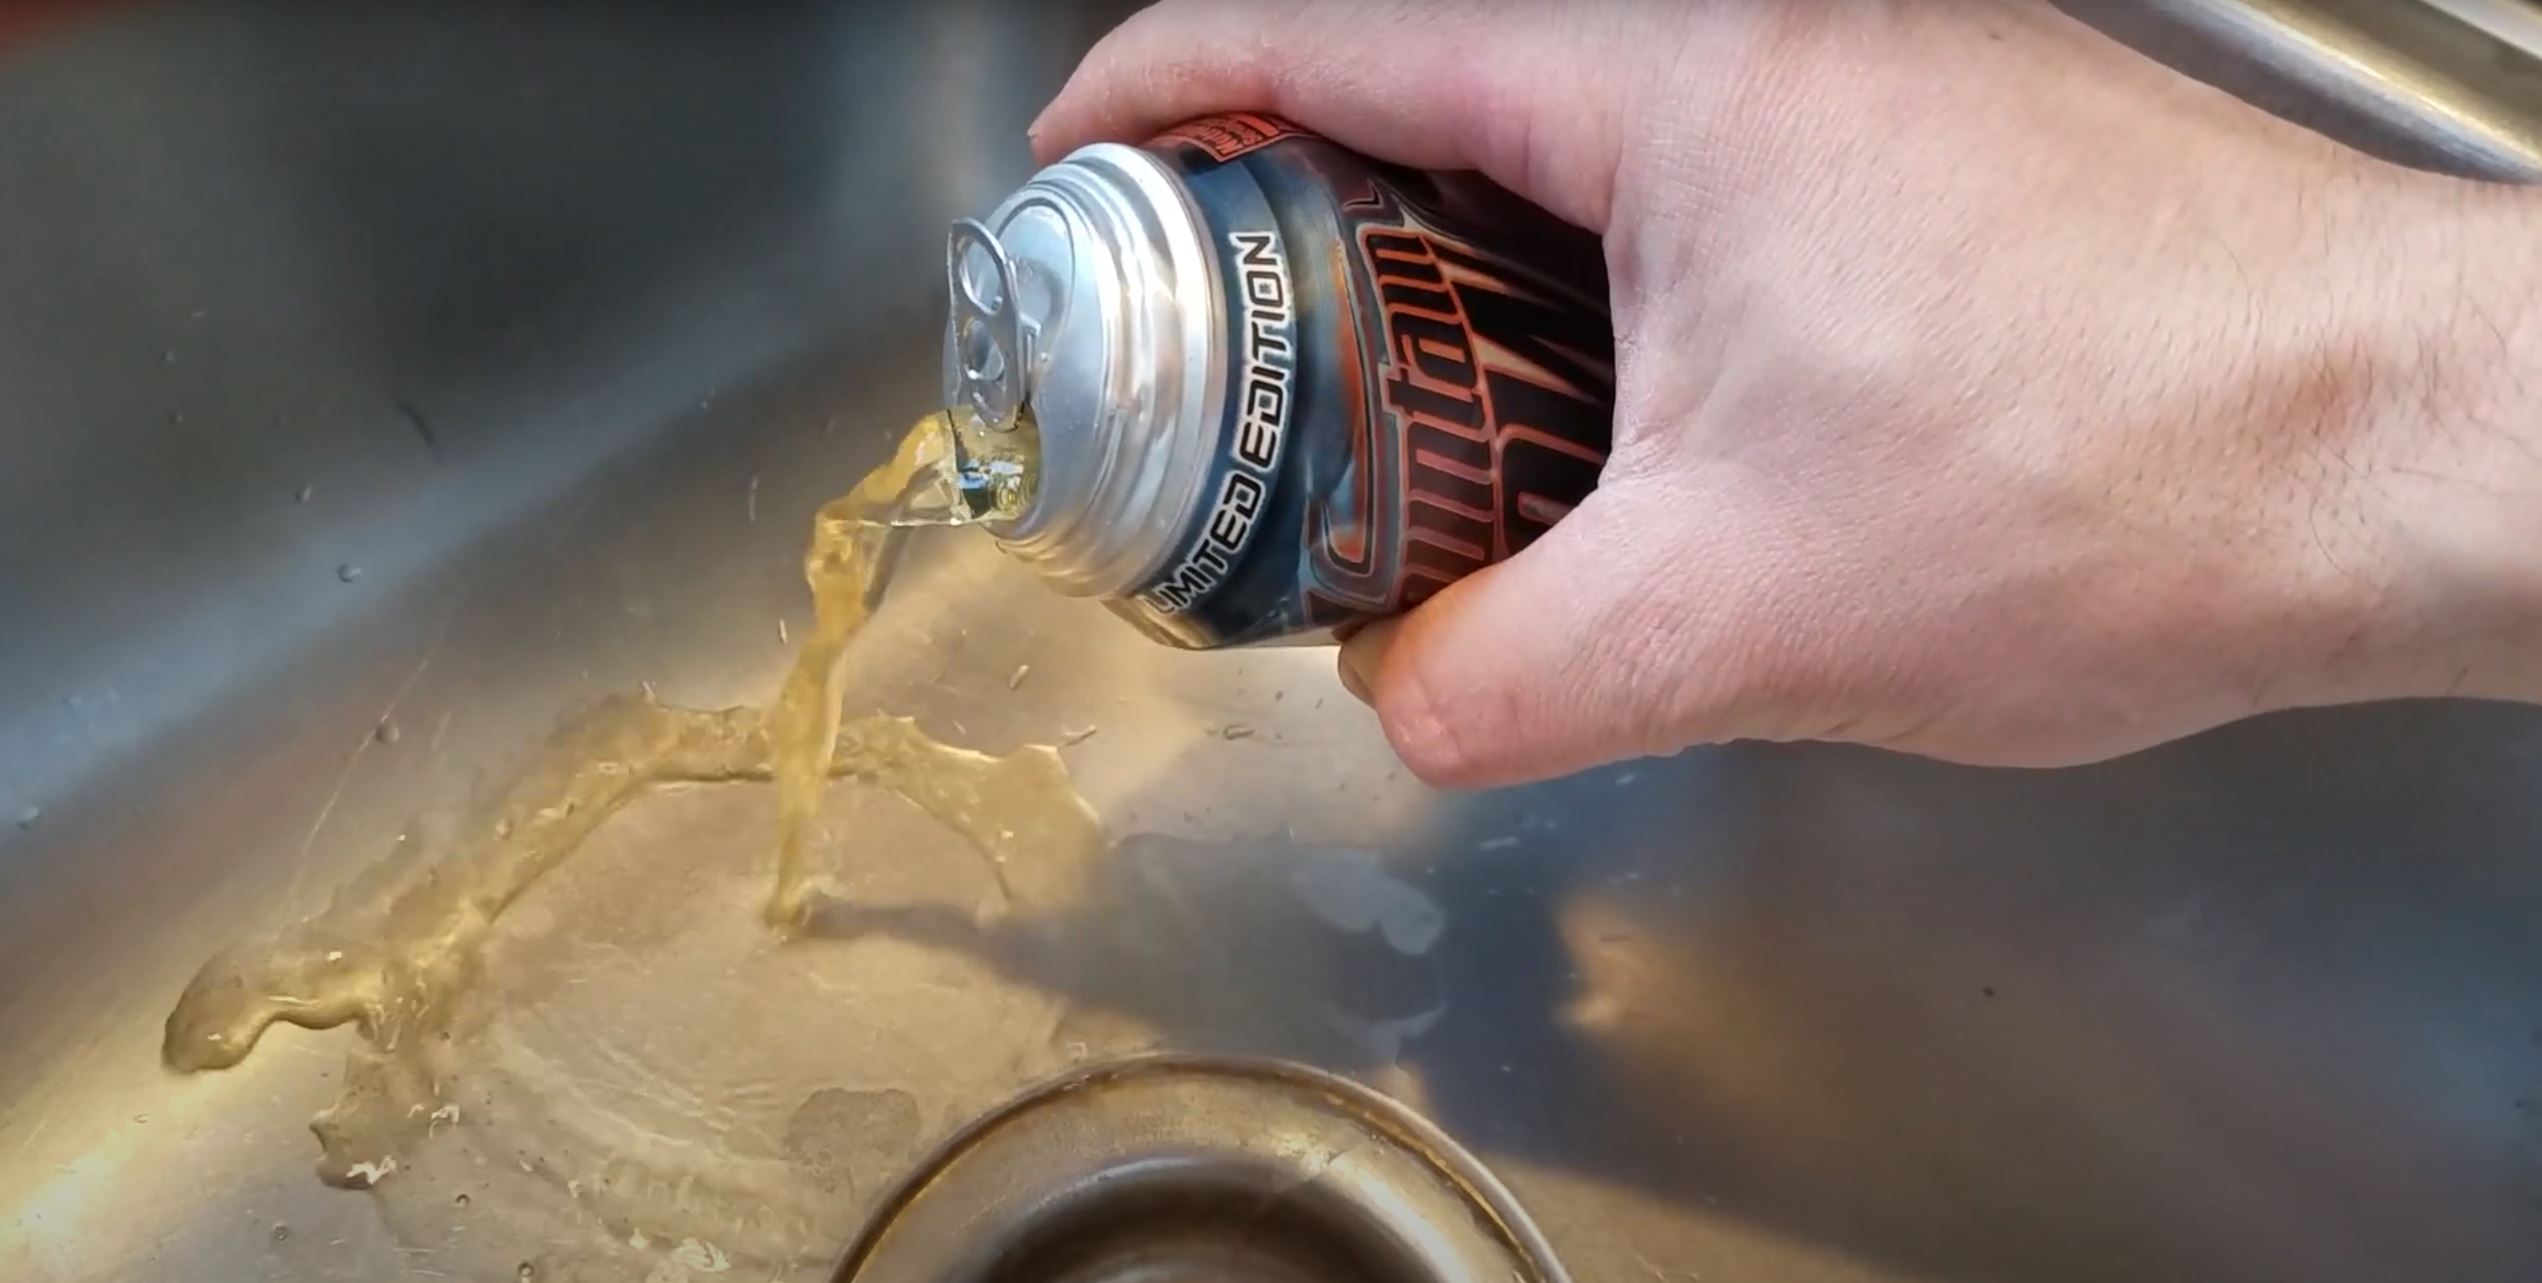 YouTube user xKorellx pours a can of Game Fuel down the sink